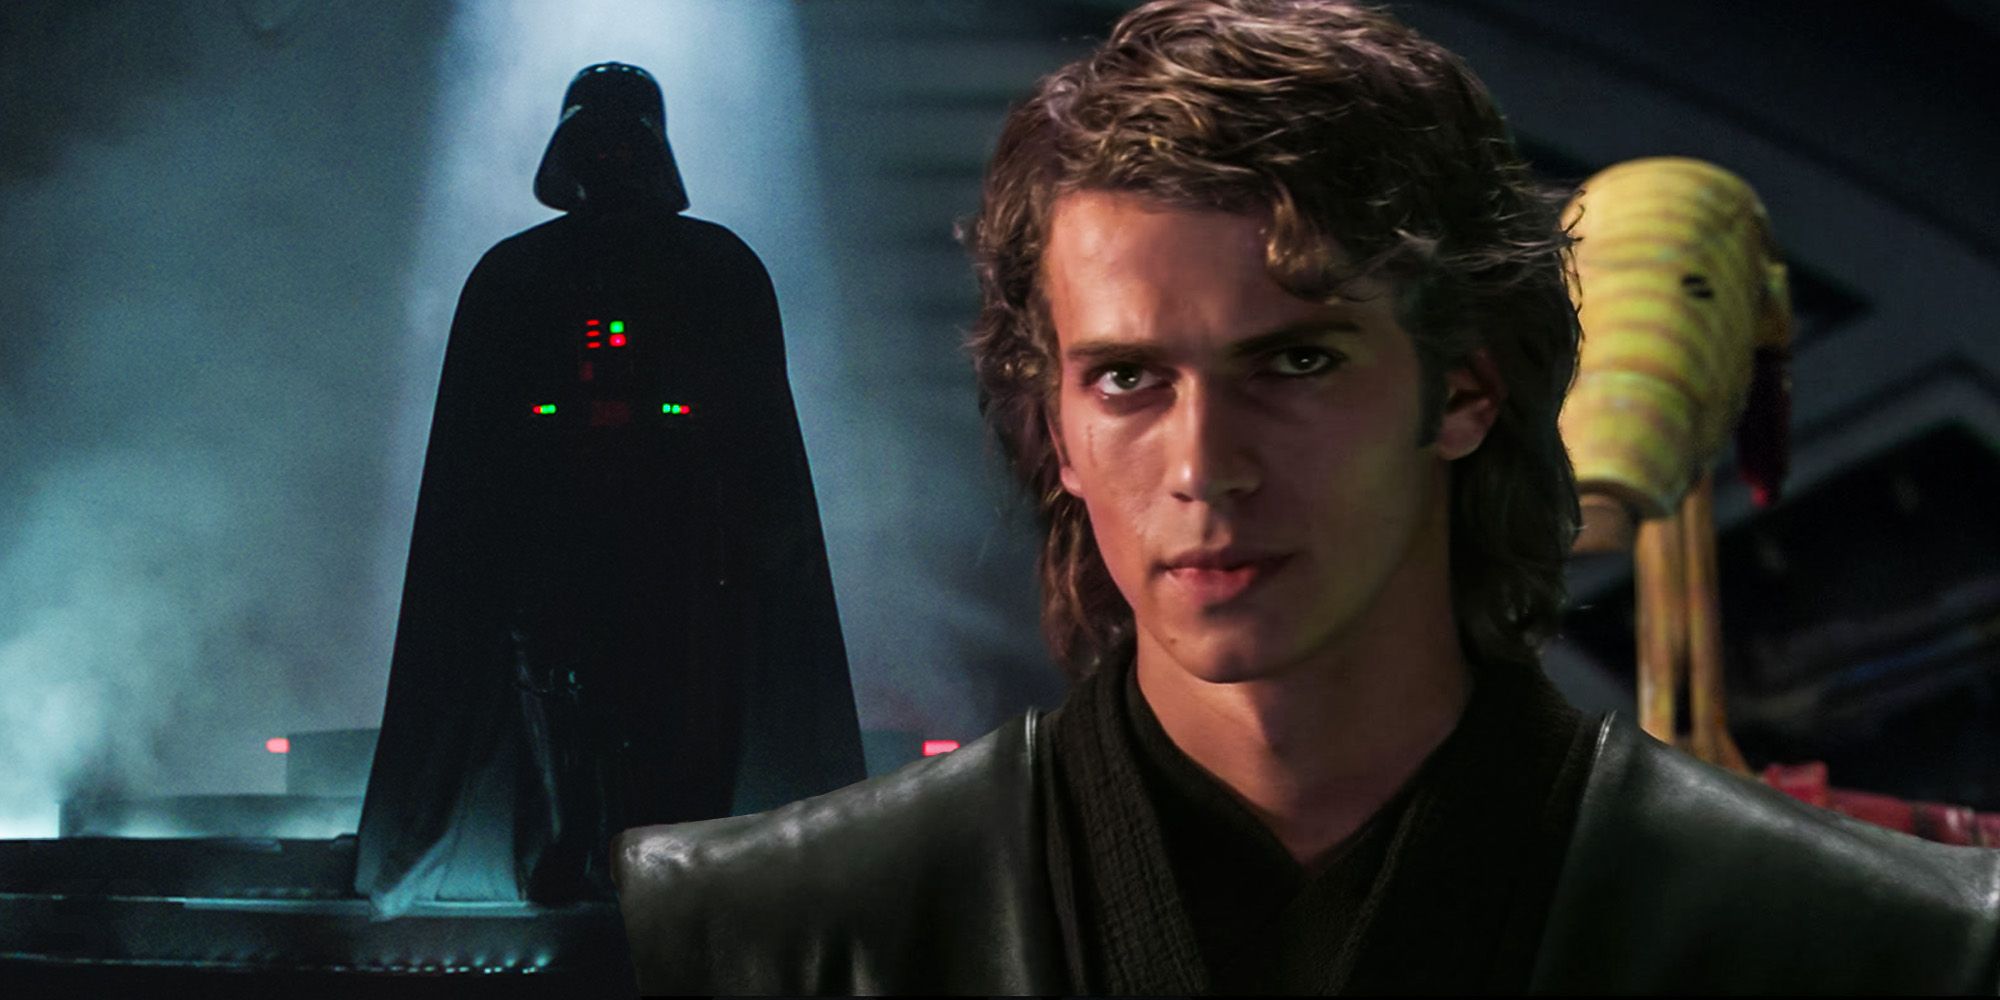 A custom image of Darth Vader standing in a single spotlight surrounded by shadow and Anakin Skywalker looking curious